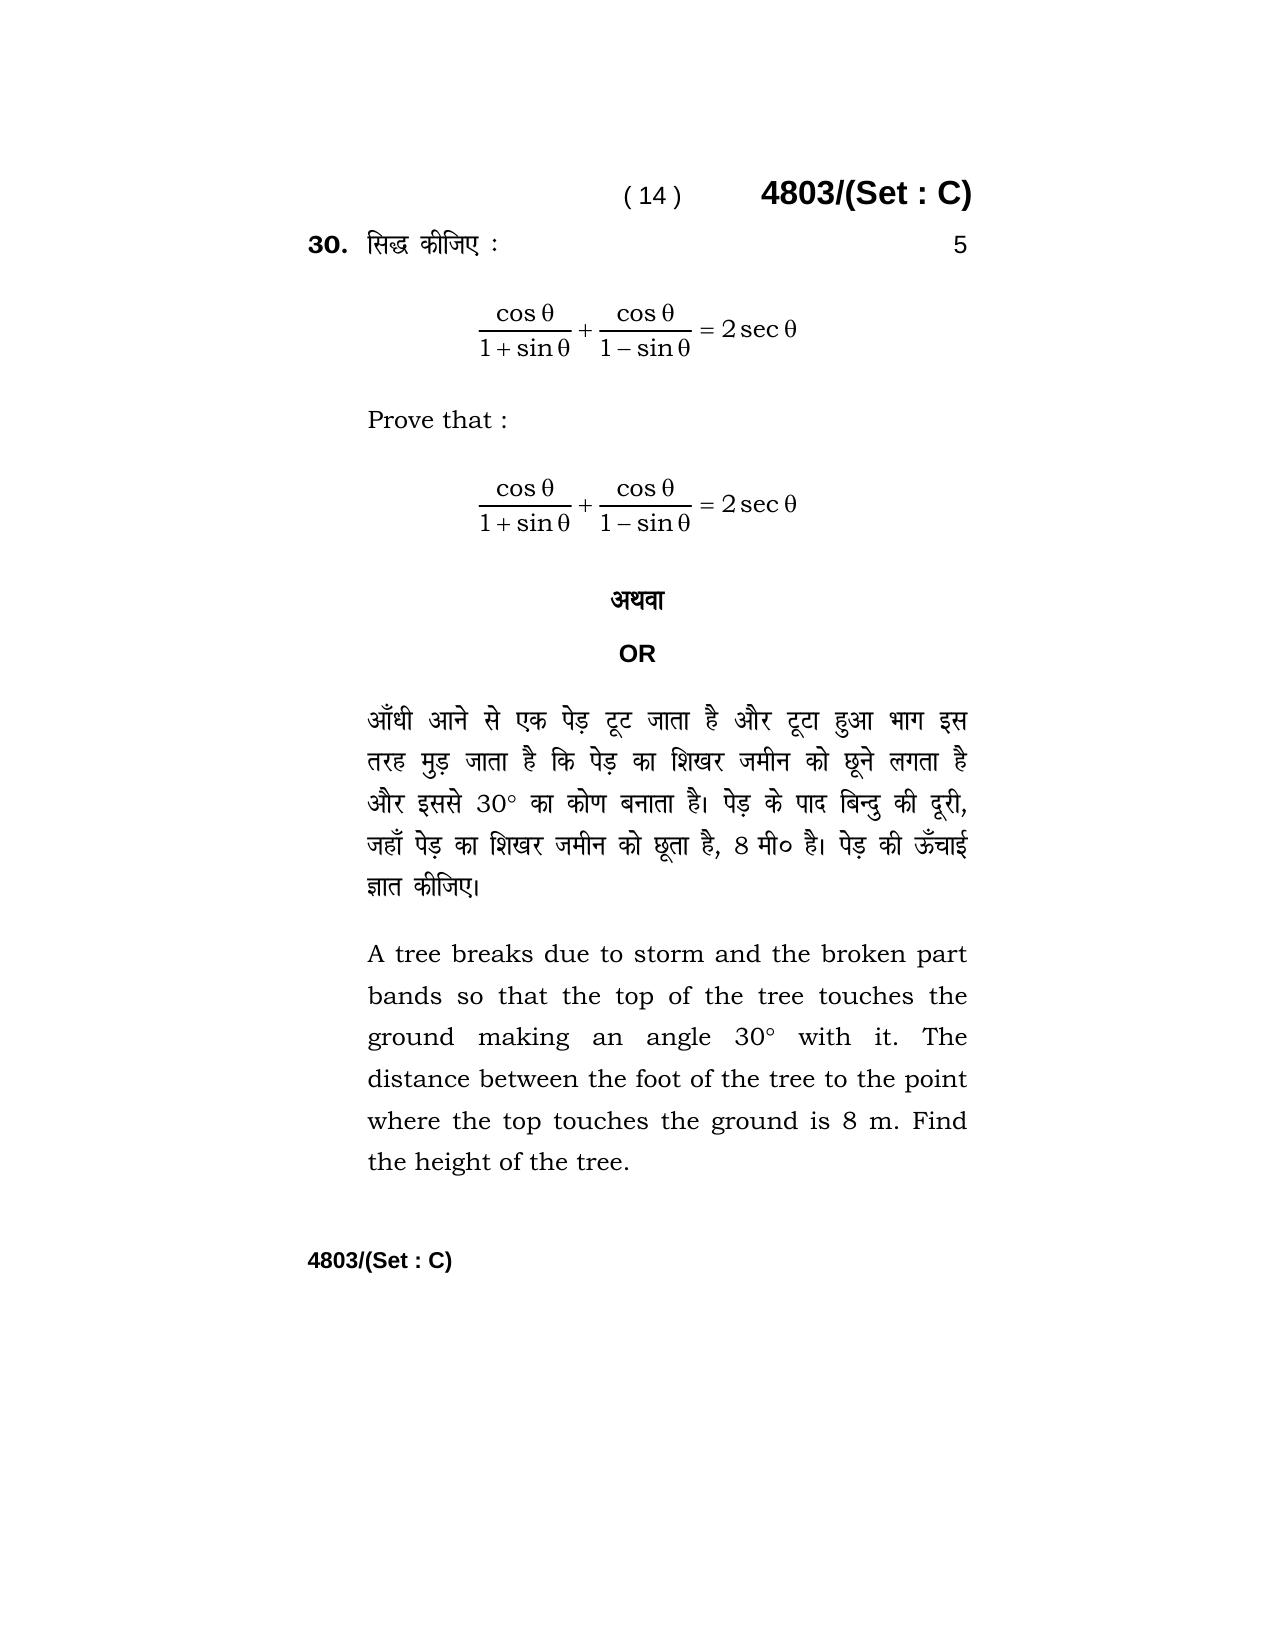 Haryana Board HBSE Class 10 Mathematics 2020 Question Paper - Page 46